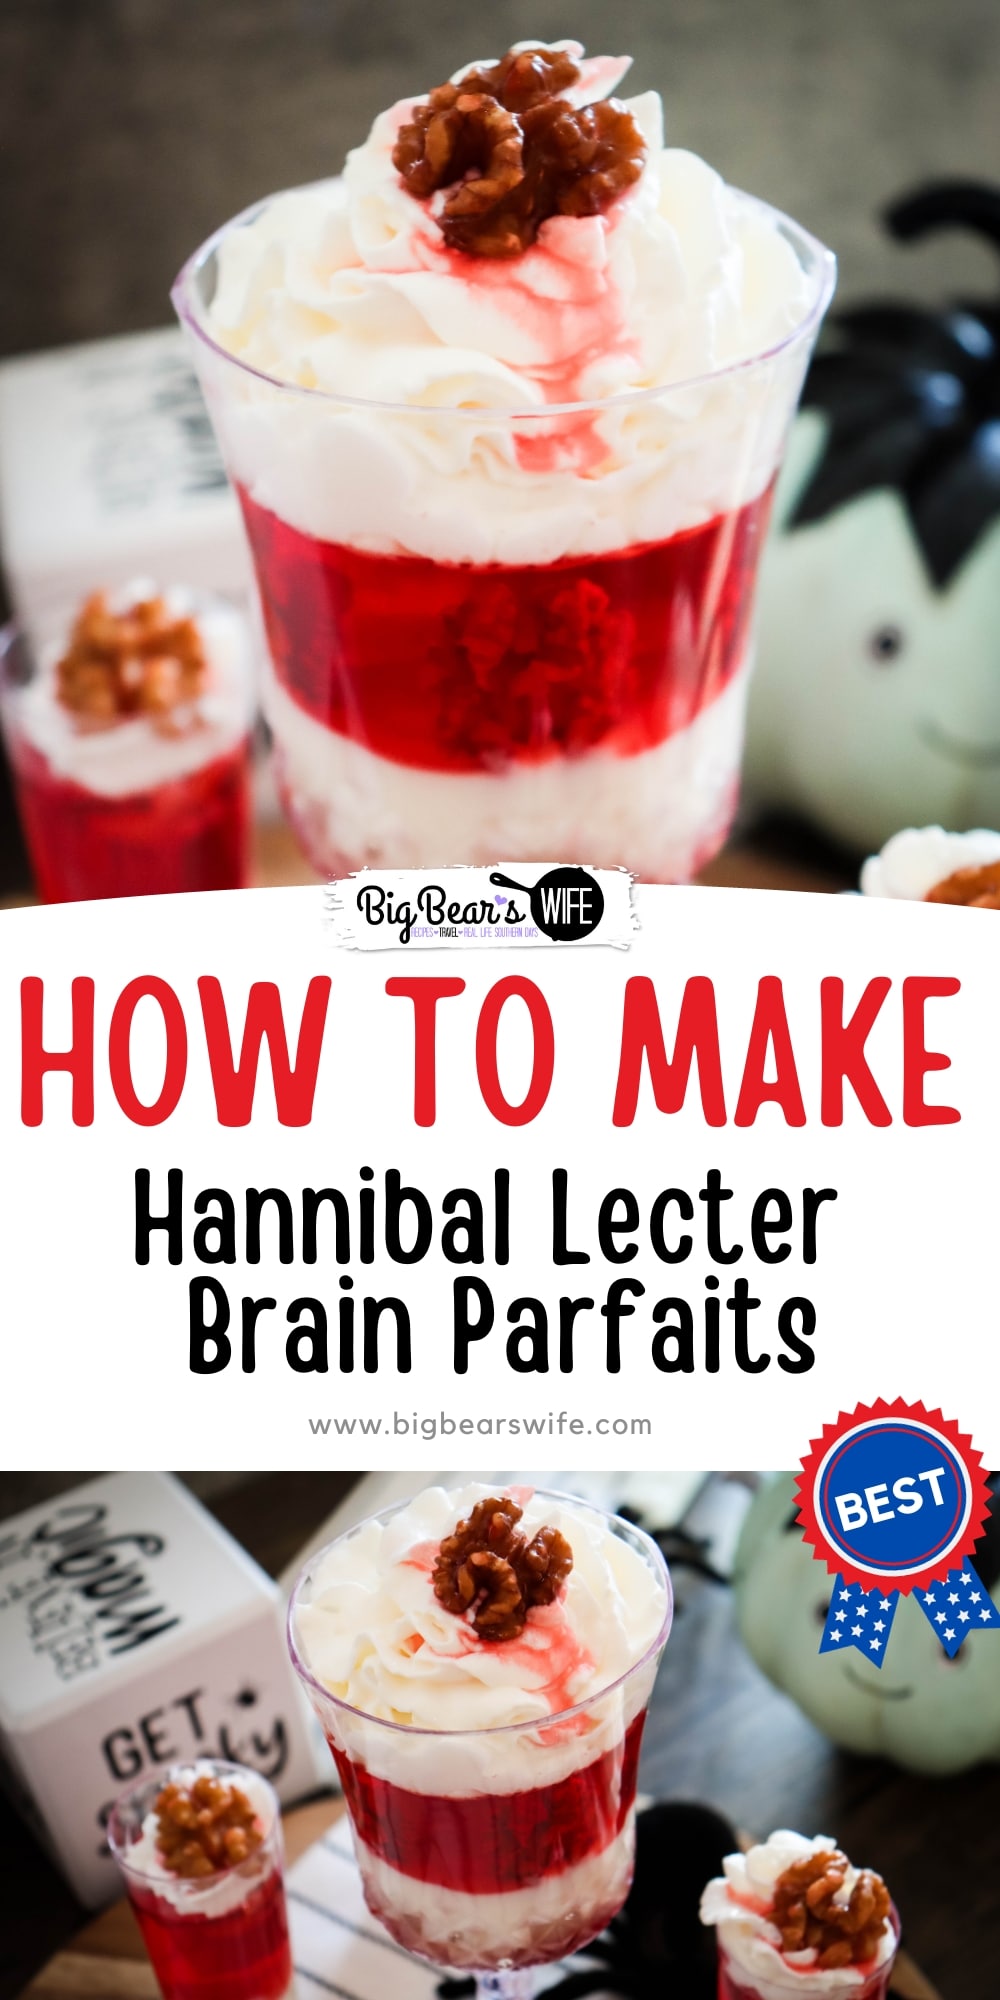 These spooky Hannibal Lecter Brain Parfaits are the perfect desserts for your next Halloween party! You'll love these creepy treats and how easy they are to make! via @bigbearswife